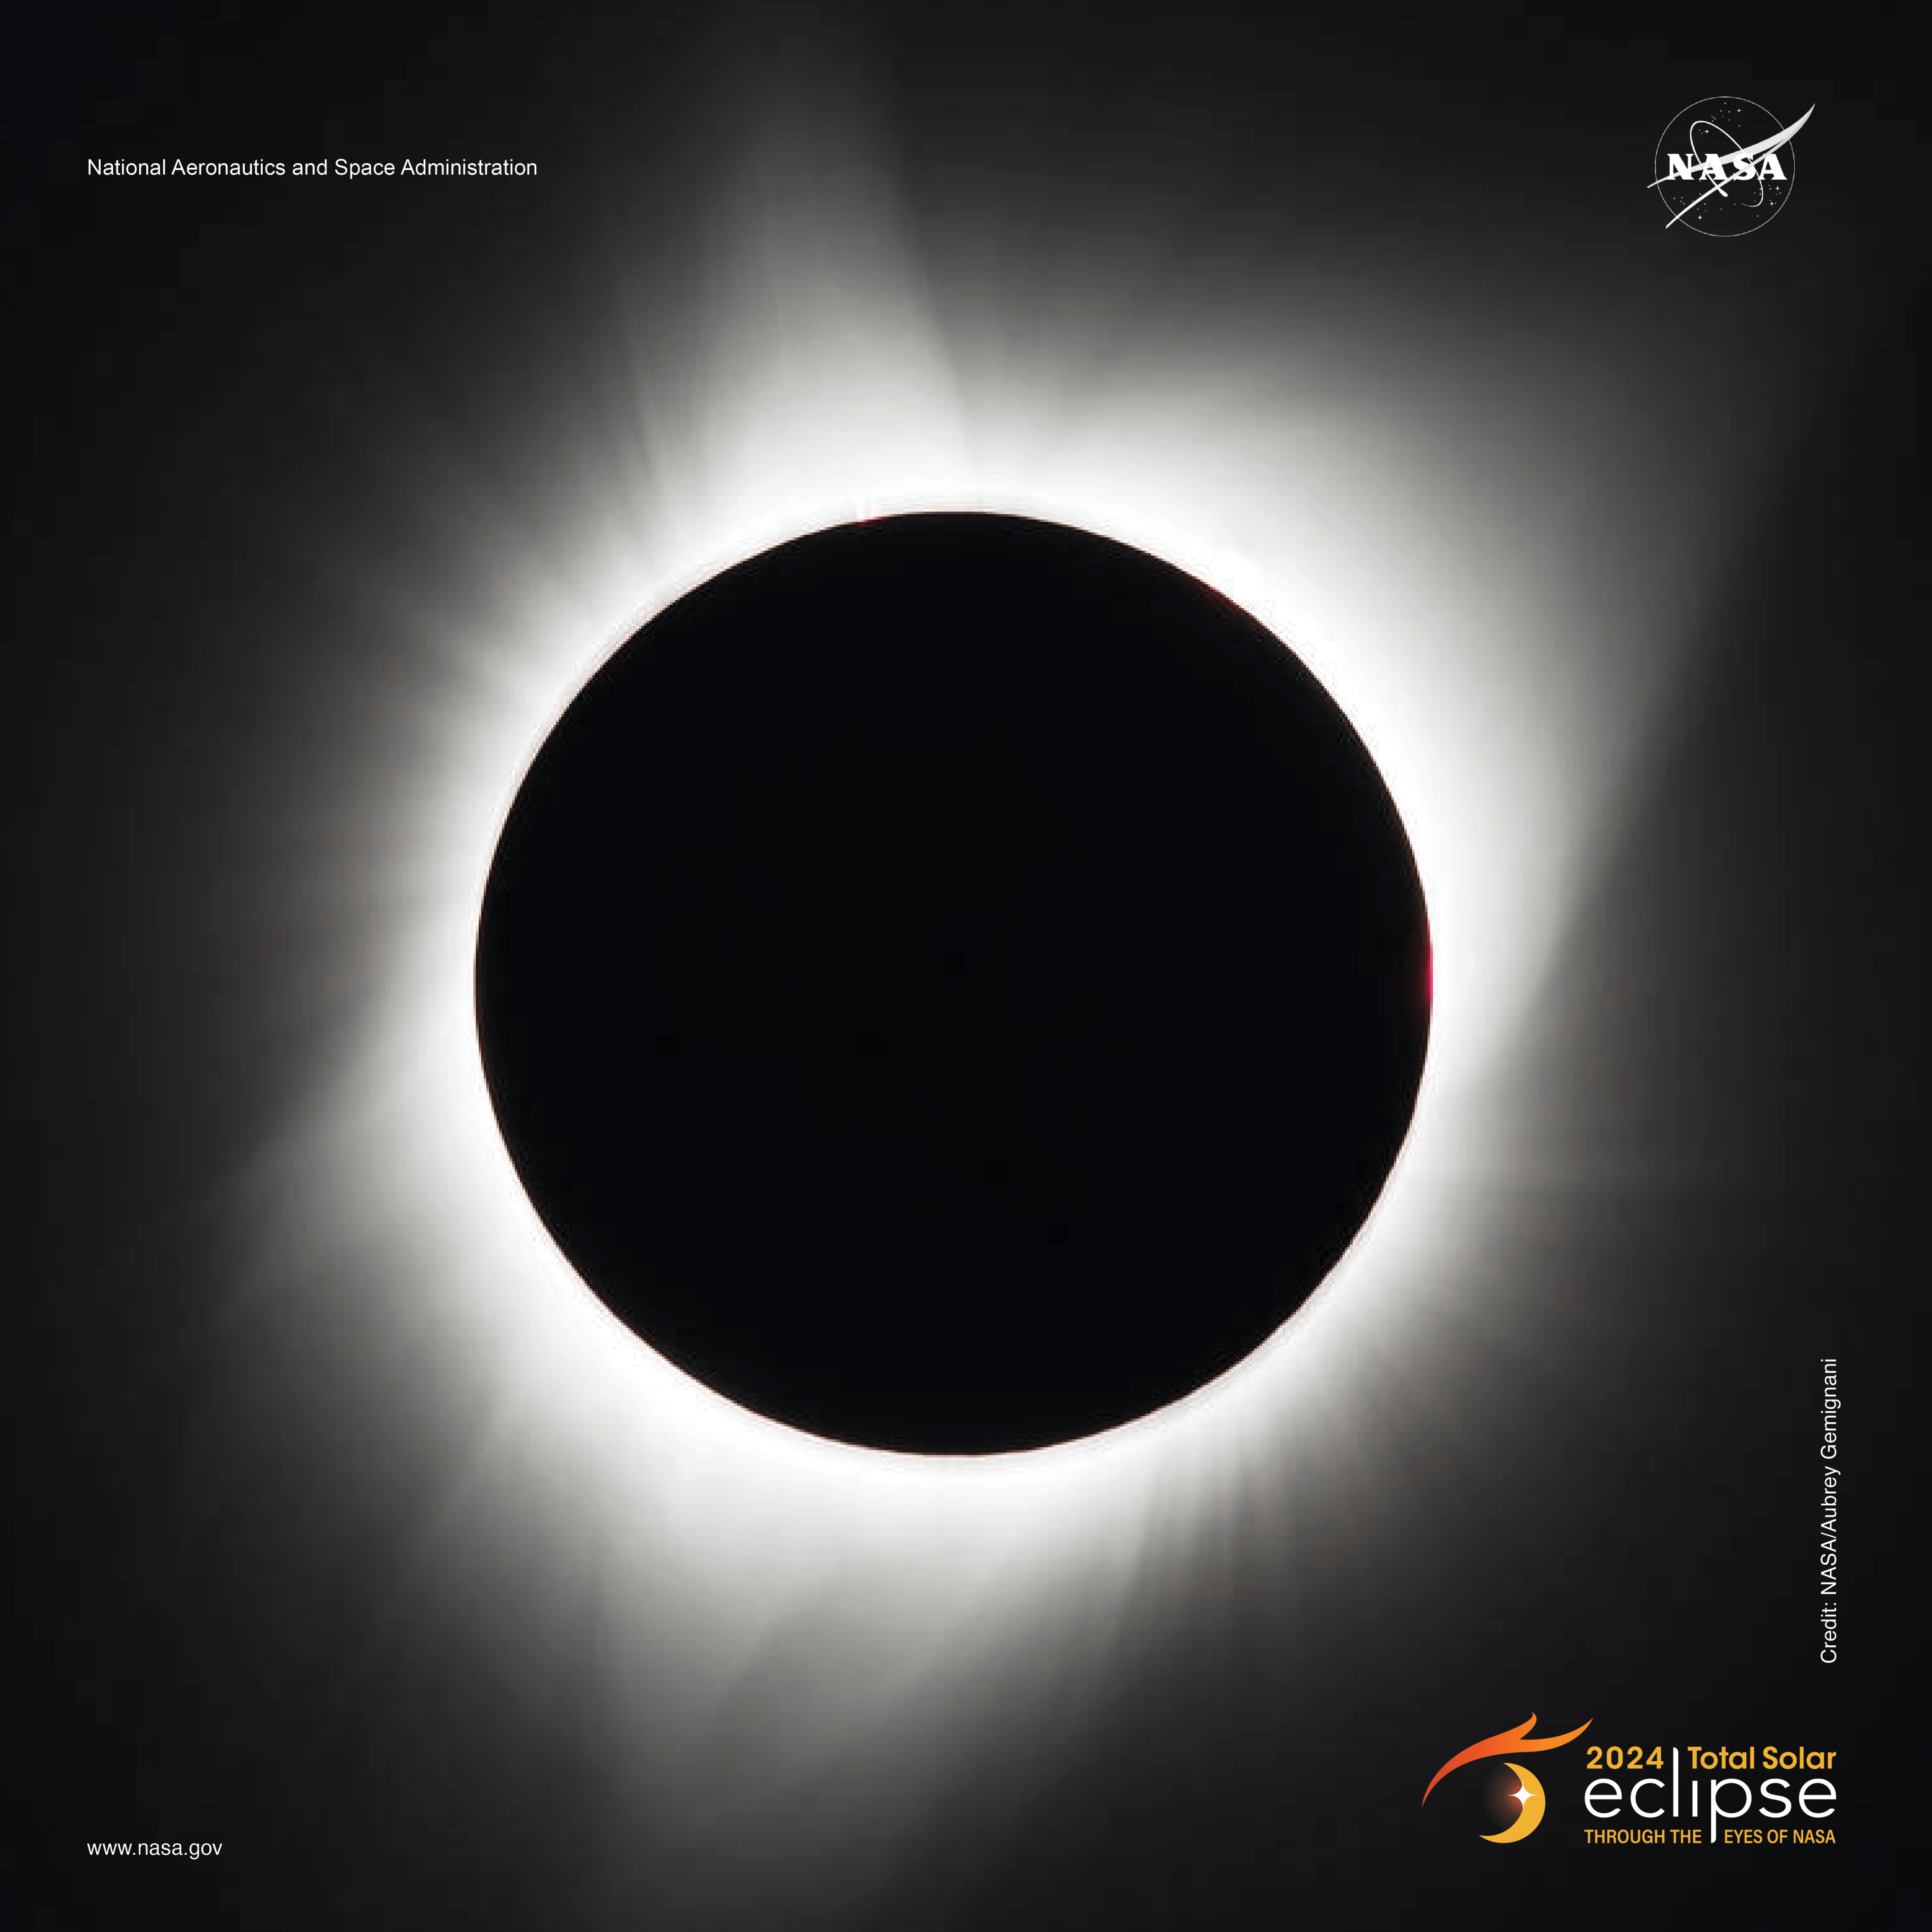 A black circle – the Moon – is at the center of the image. Surrounding it are white streams of light that fill the dark background. The NASA insignia is at the top of the poster, and the eclipse identifier – a graphic that shows a partial eclipse, with a swoosh above it, is at the bottom right. The identifier reads 2024 Total Solar Eclipse Through the Eyes of NASA.